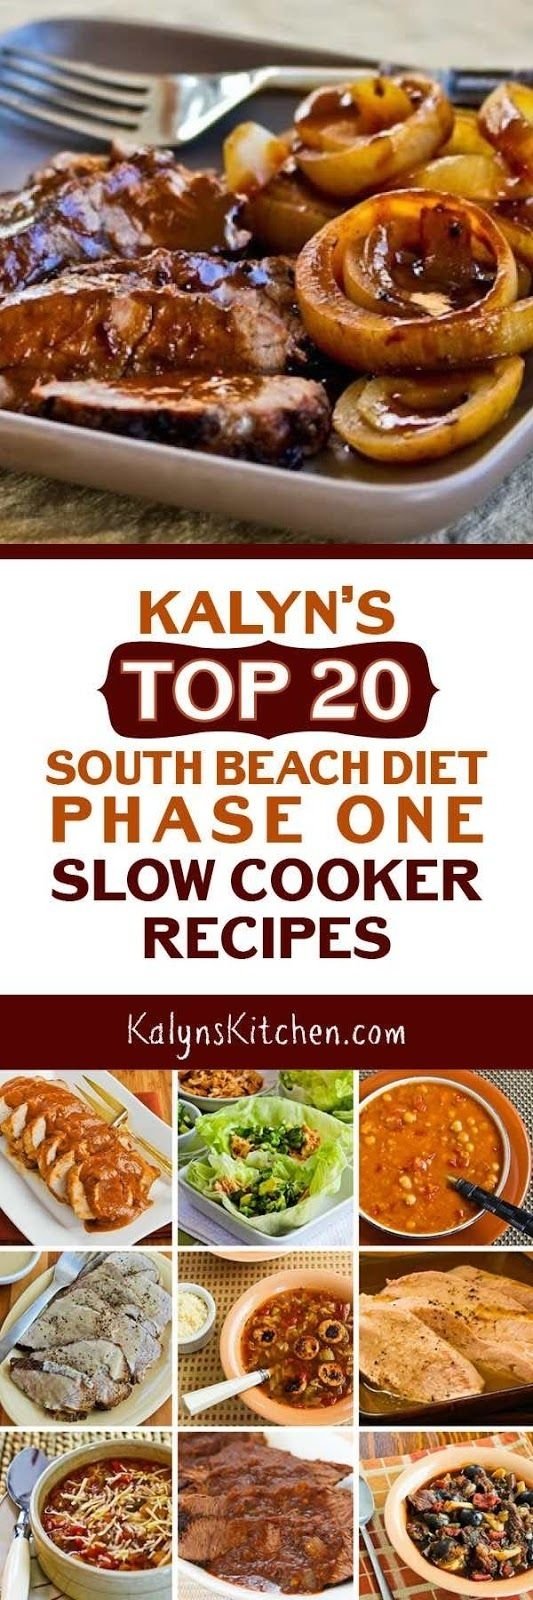 10 Attractive South Beach Diet Lunch Ideas kalyns top 20 south beach diet phase one slow cooker recipes 2023